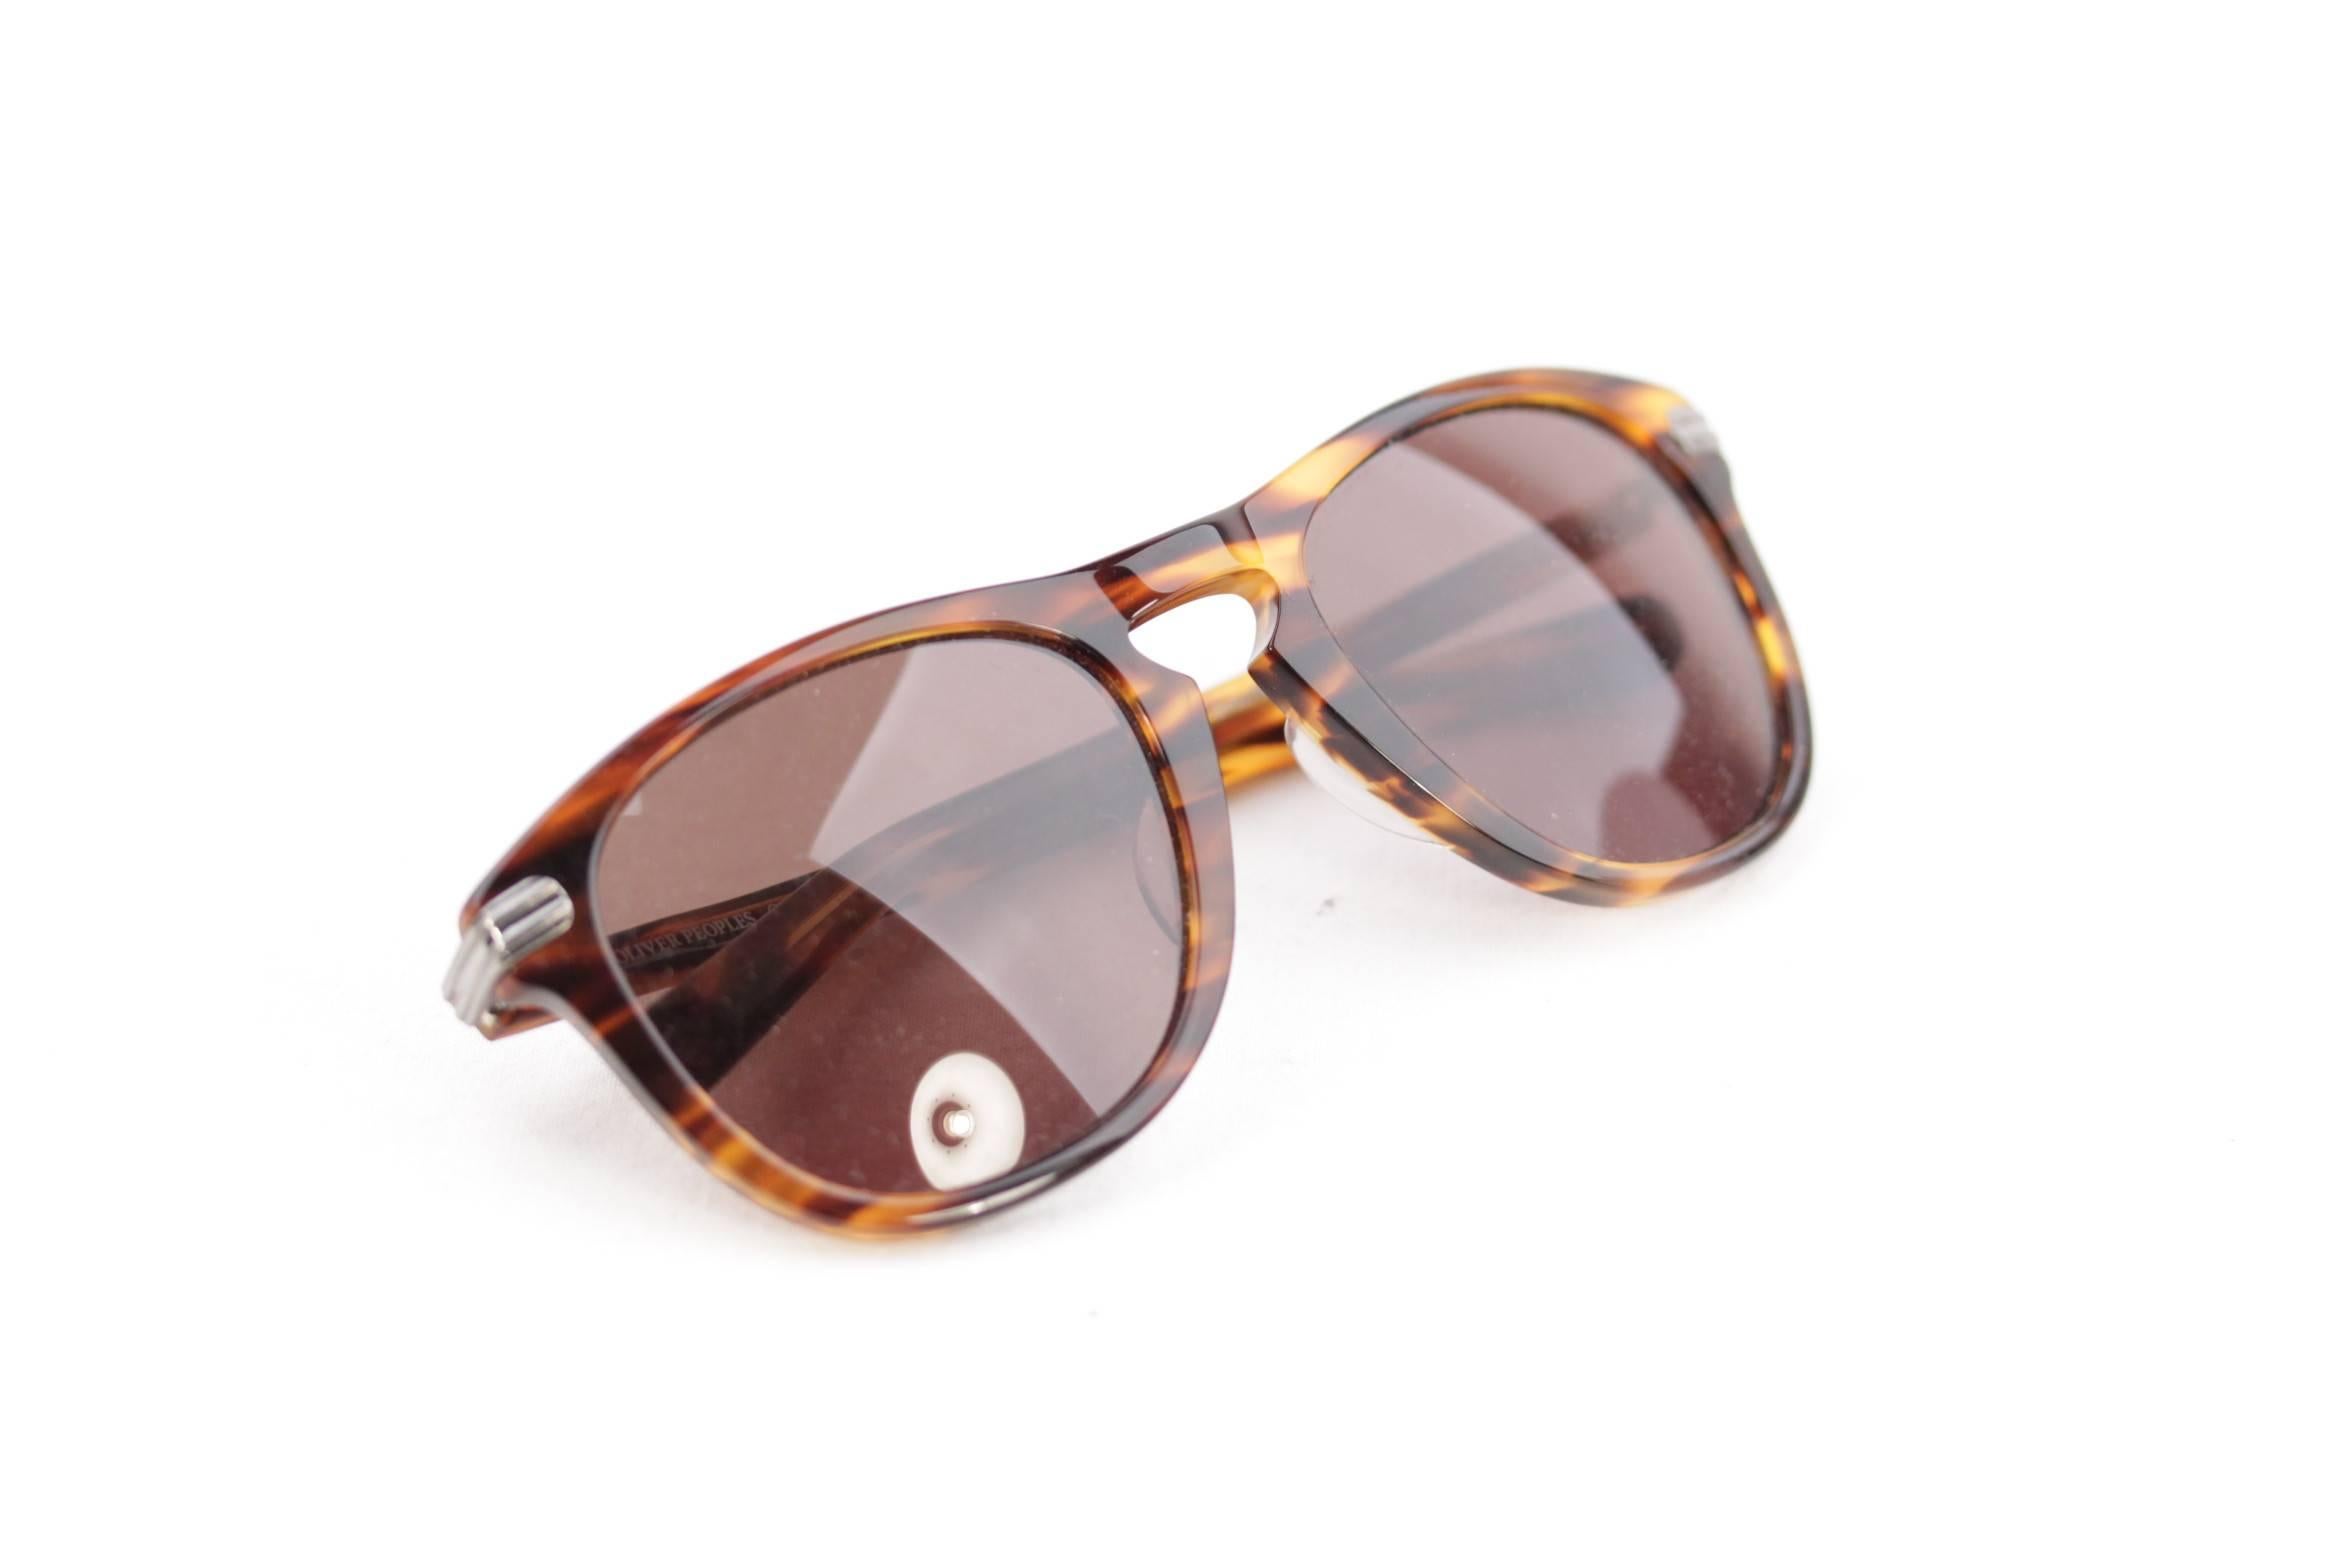 OLIVER PEOPLES Brown tortoise SUNGLASSES CANTON OV 5275SD 143371 56/22 140 3N 1